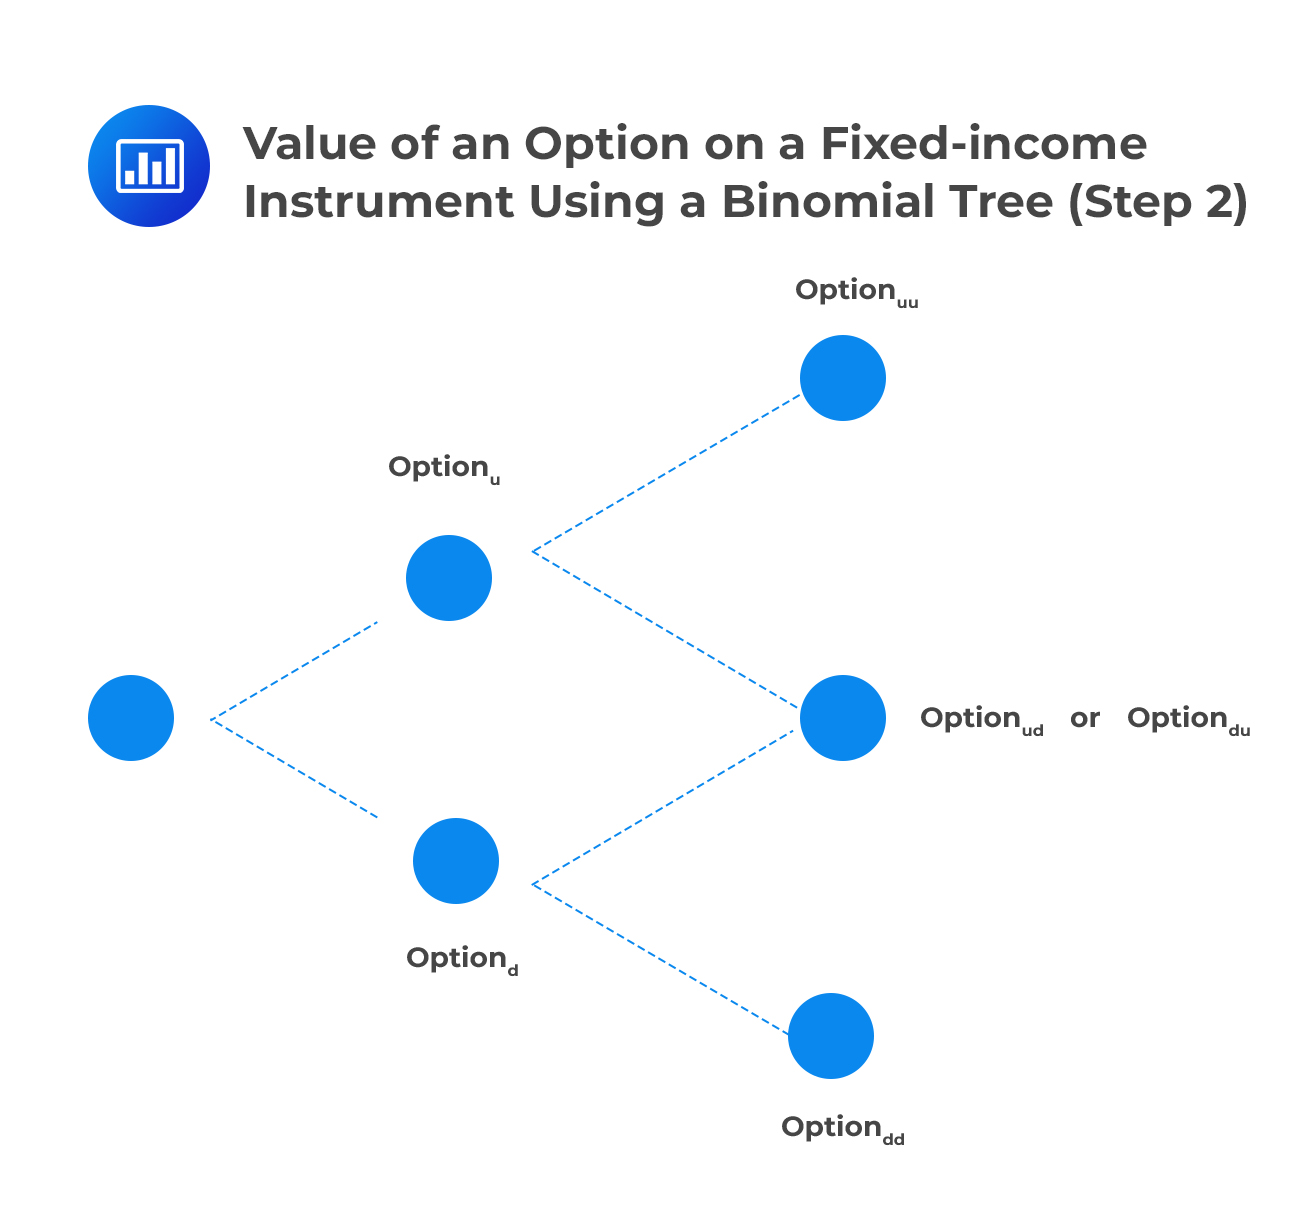 Value of an Option on a Fixed-income Instrument Using a Binomial Tree (Step 2)